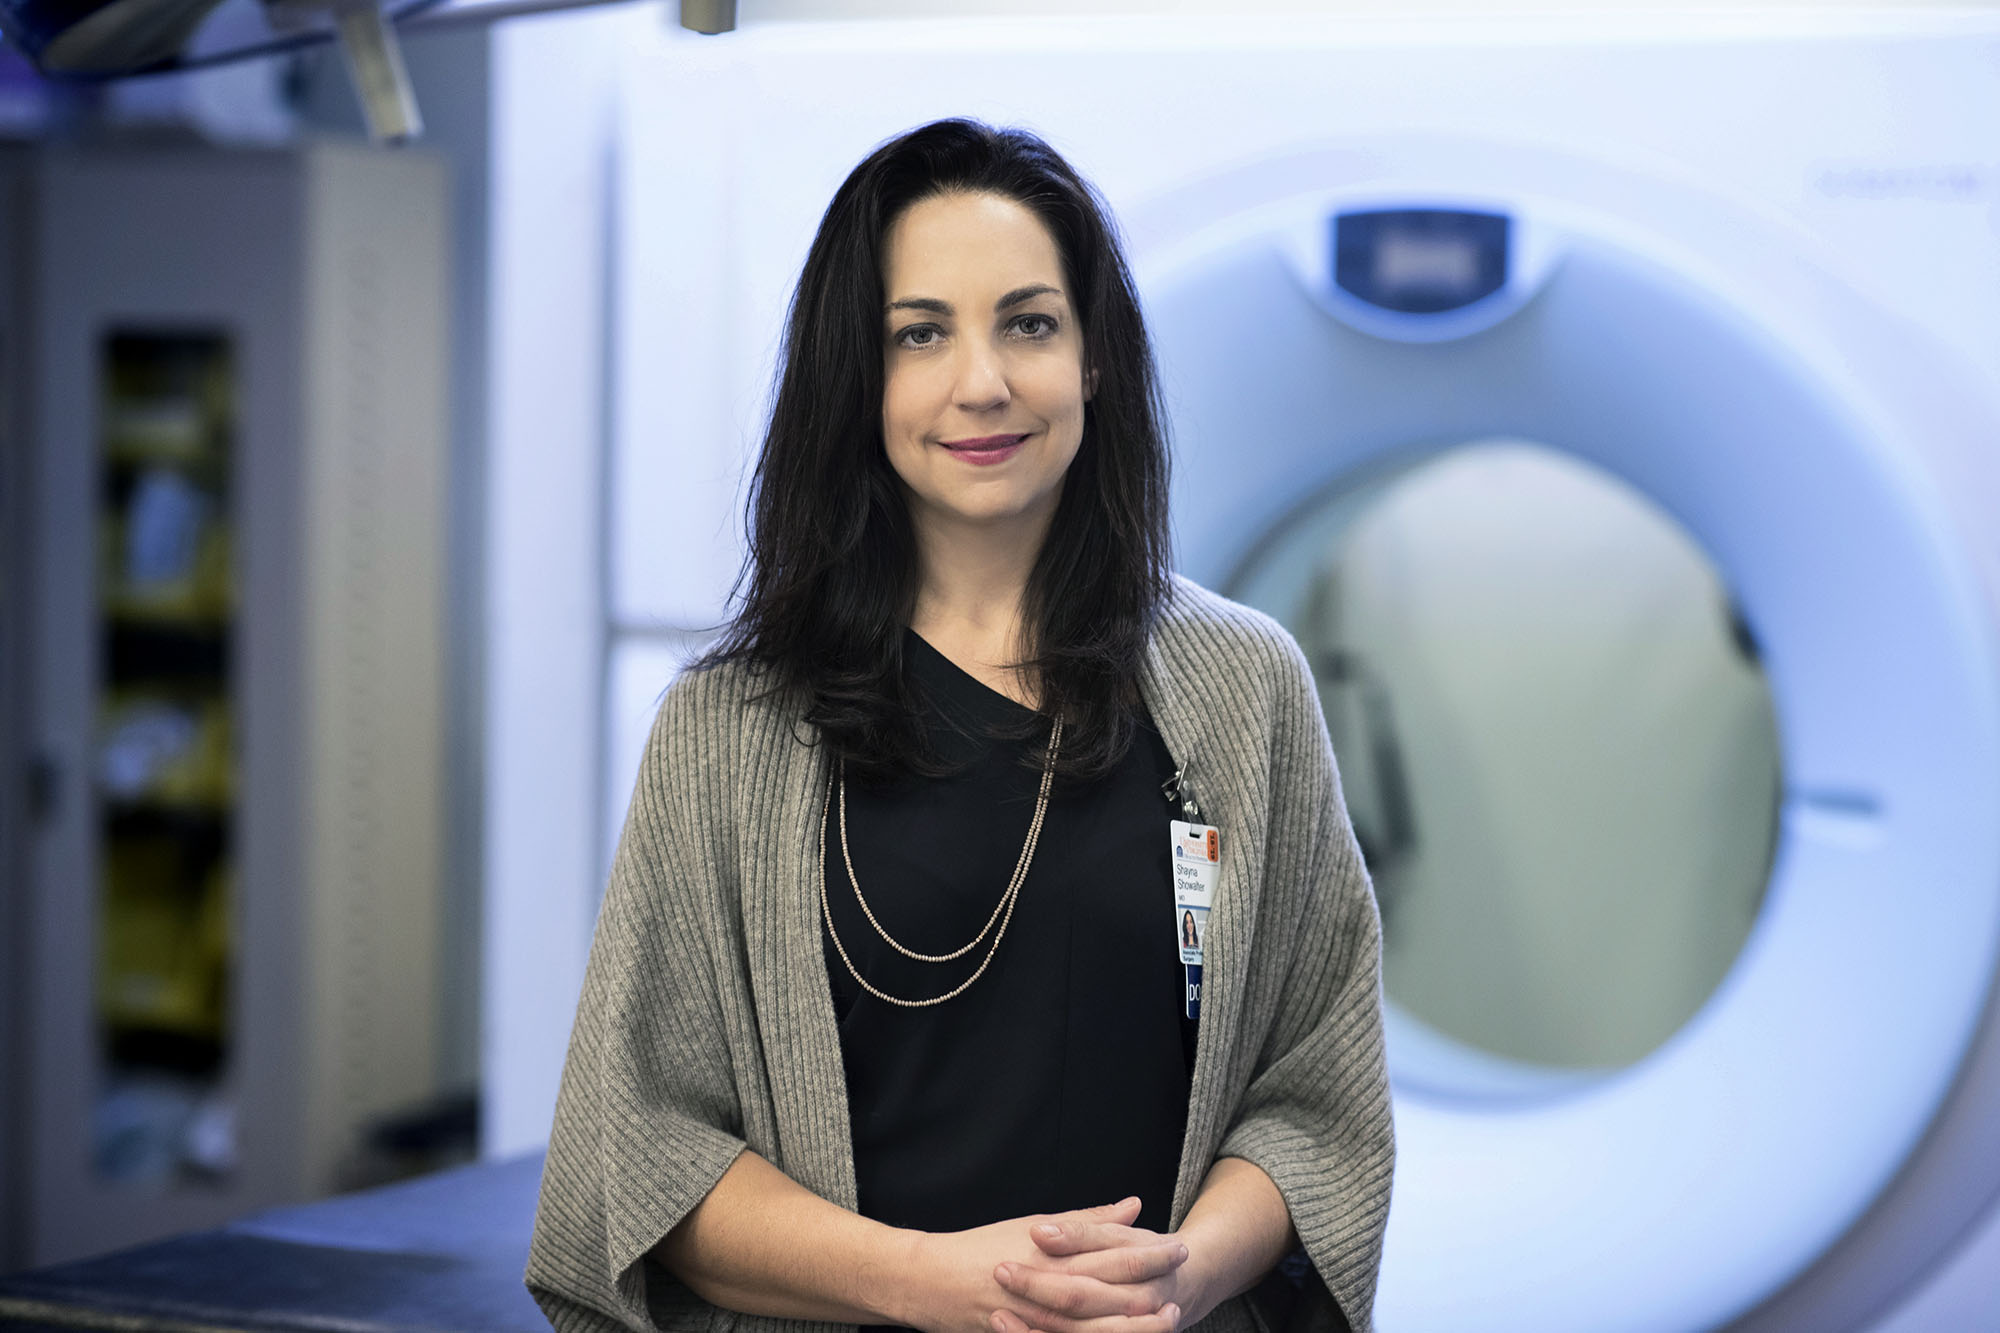 Dr. Shayna L. Showalter headshot in front of an MRI machine